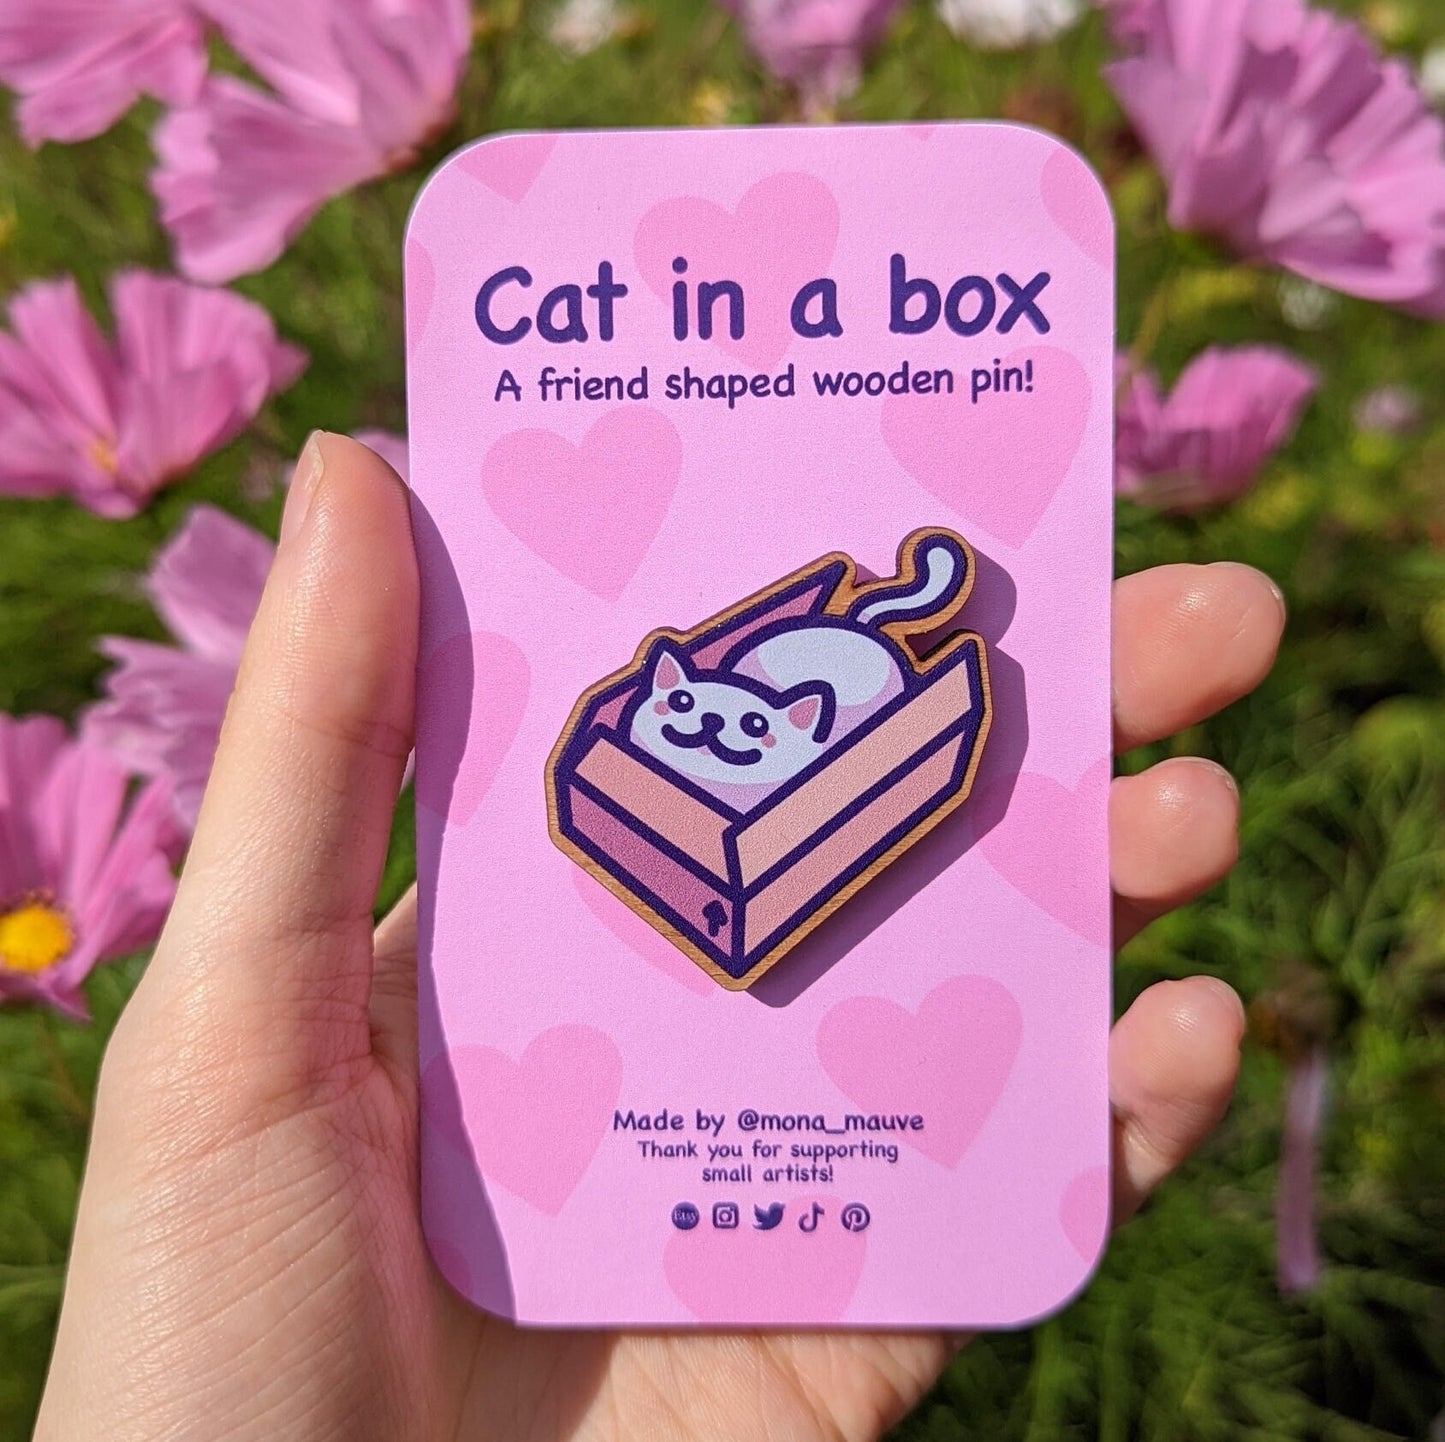 A cute wooden badge with an illustration of a smug cat in a box. The pink backing card reads: "Cat in a box! A friend-shaped wooden pin"